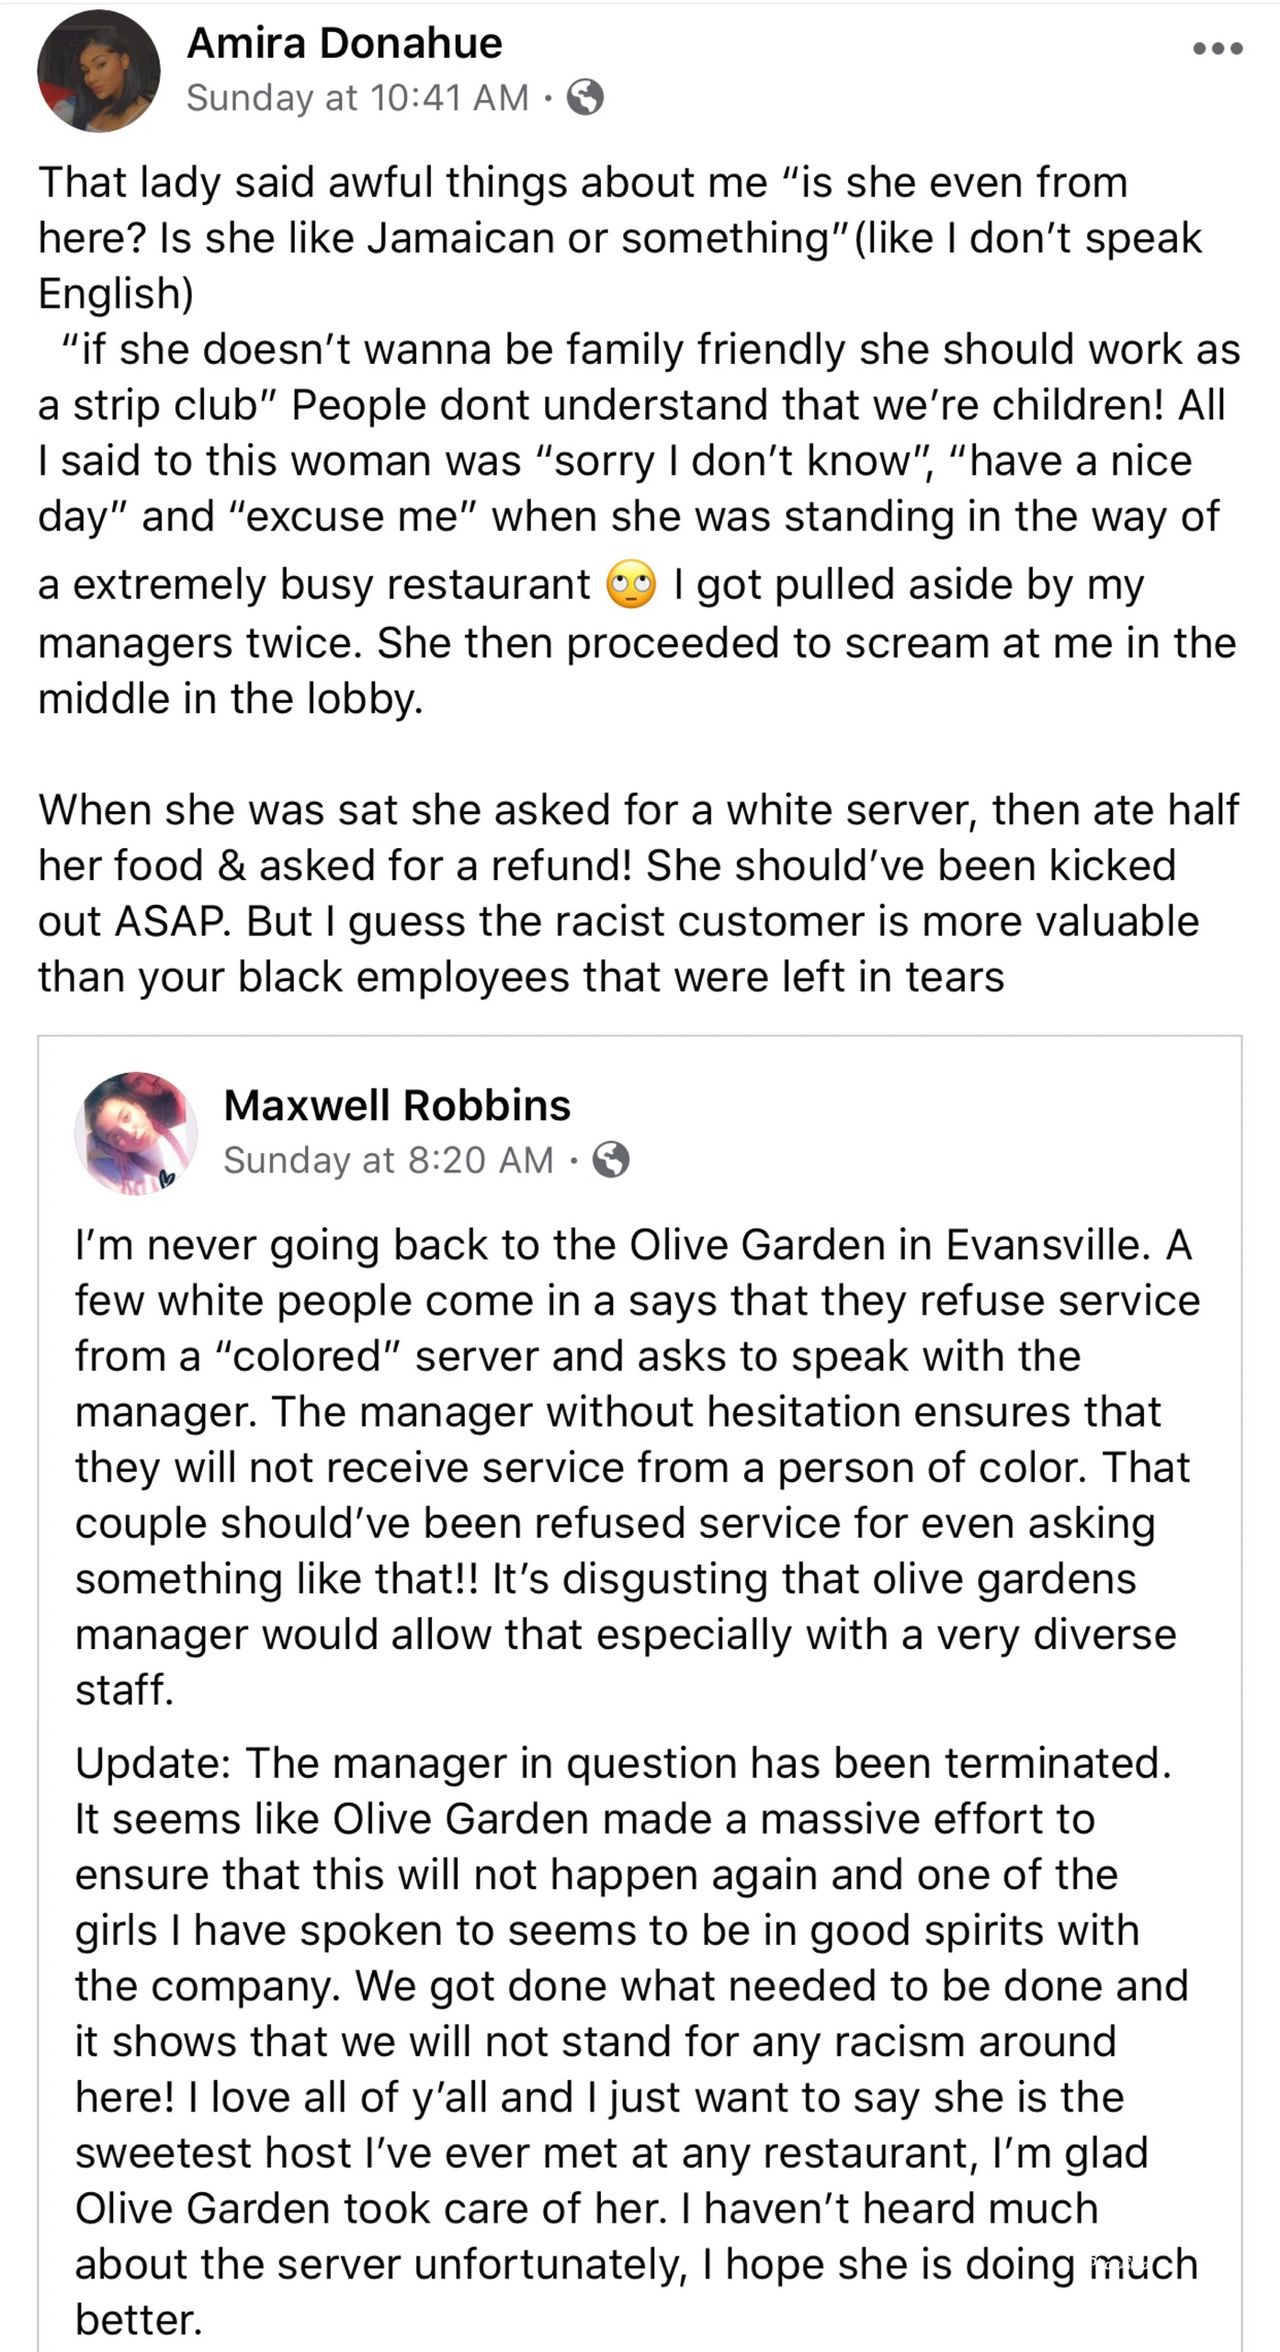 Olive Garden Manager Fired After Complying With Racist Customer